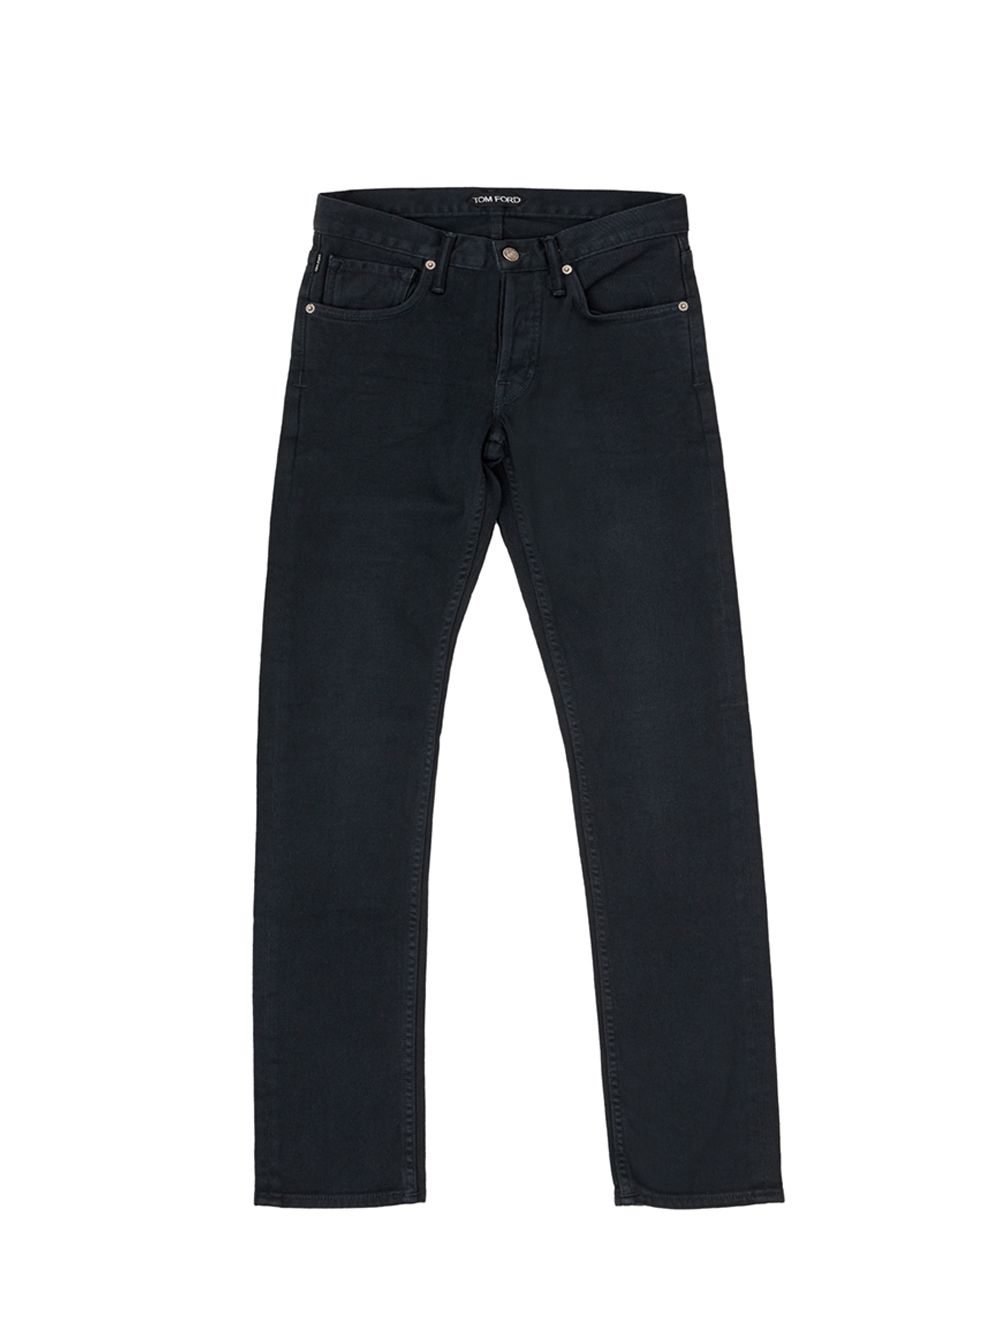 Tom Ford Anthracite Jeans Pants